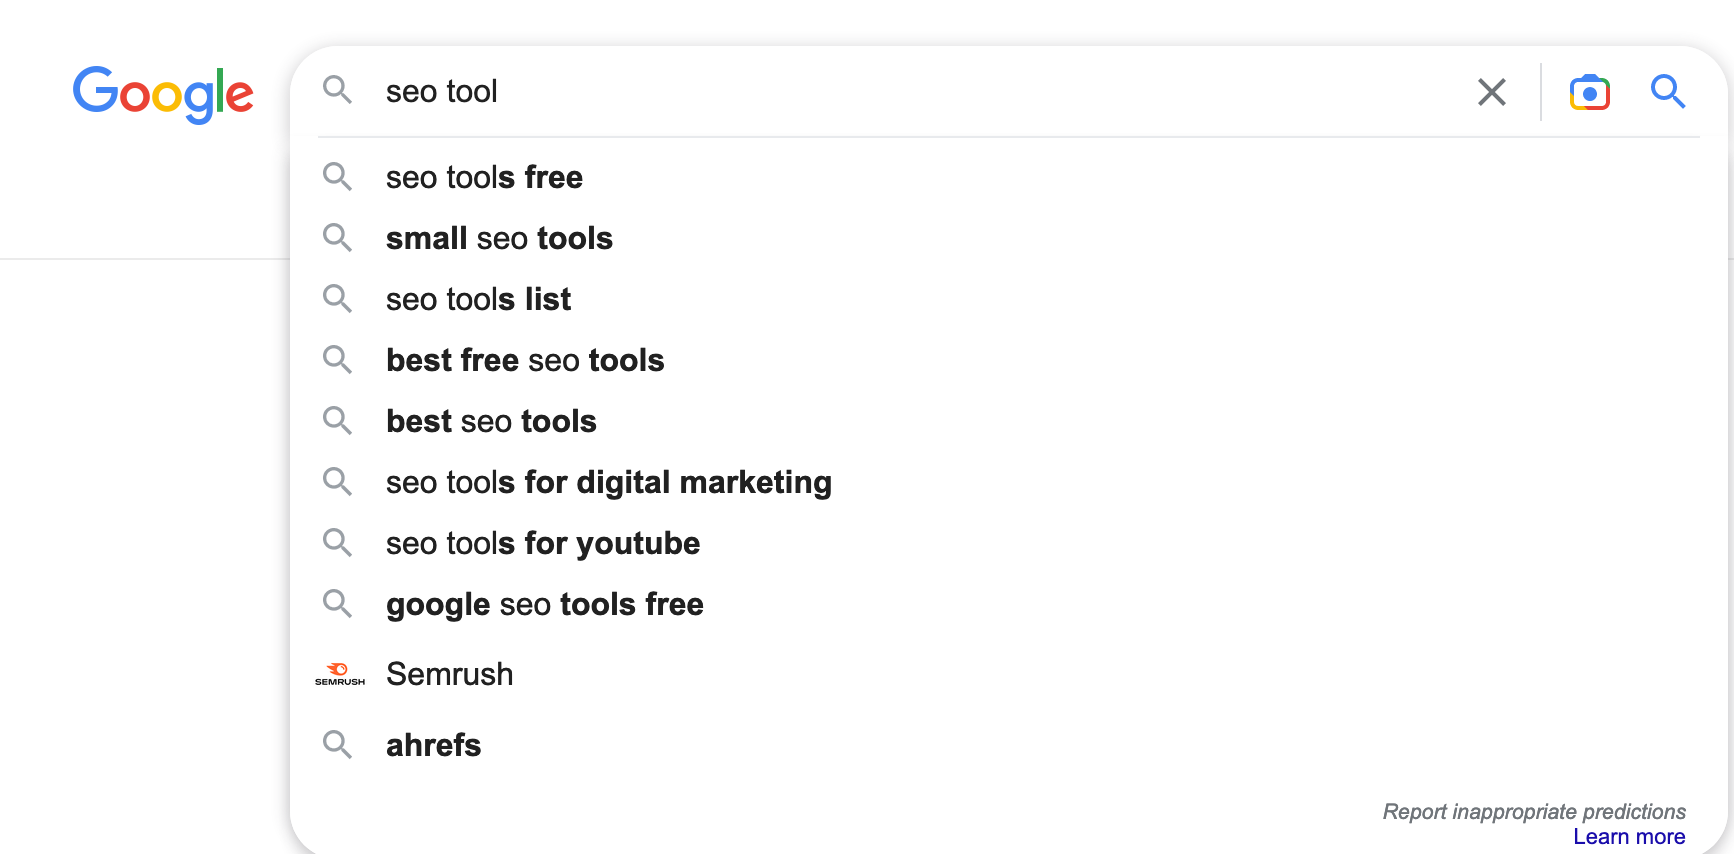 Related Google searches for the key phrase "SEO tool."